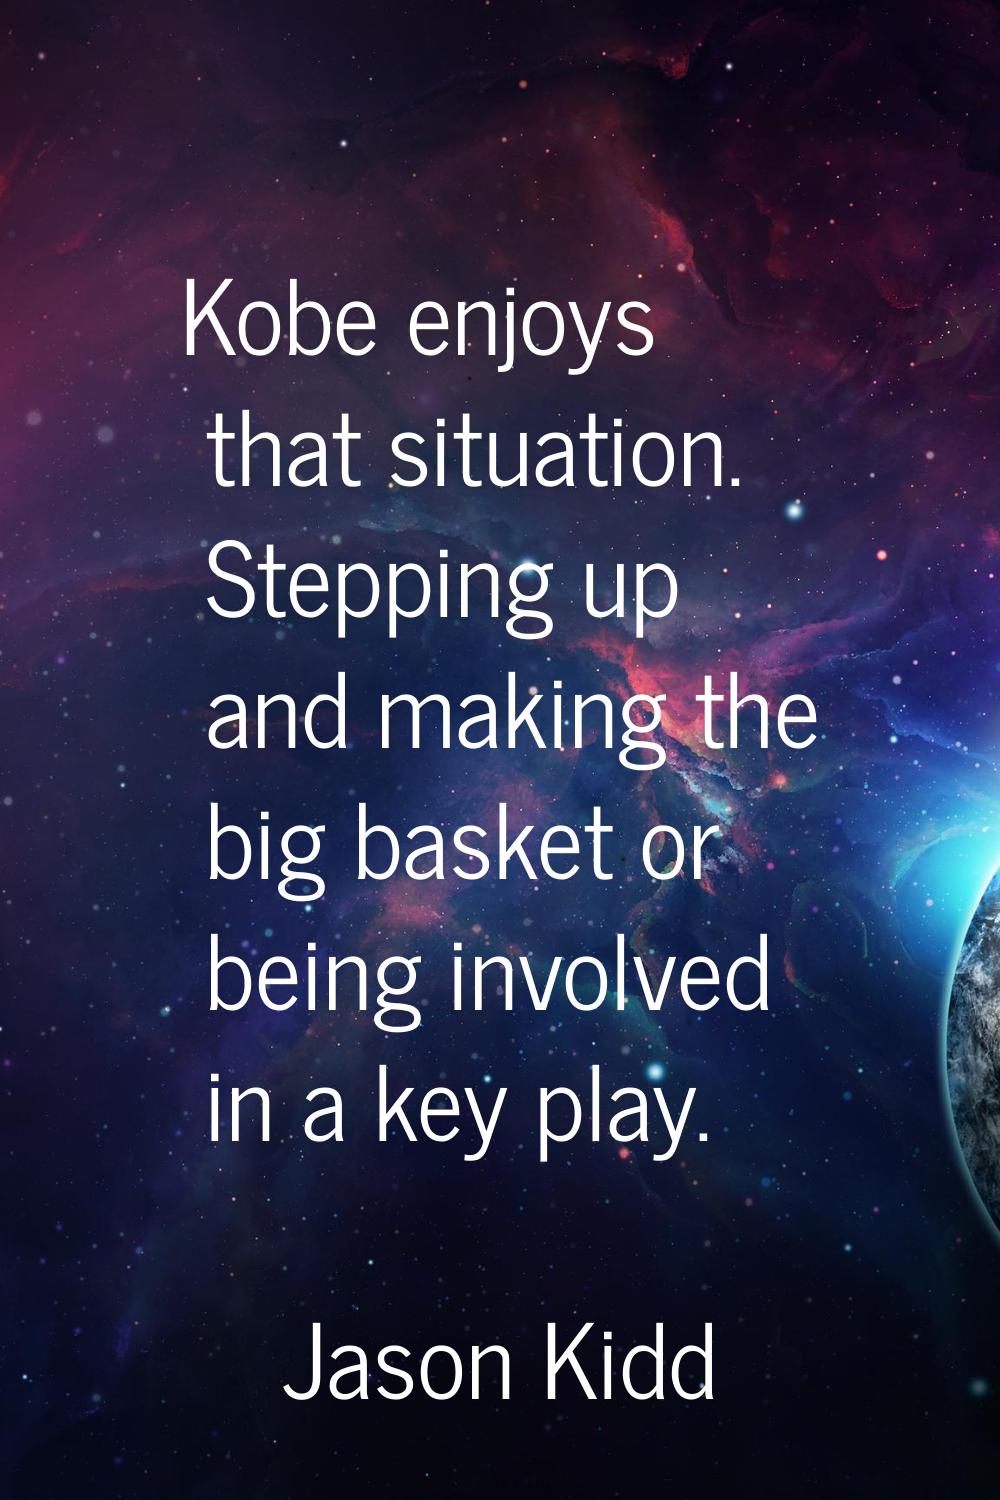 Kobe enjoys that situation. Stepping up and making the big basket or being involved in a key play.